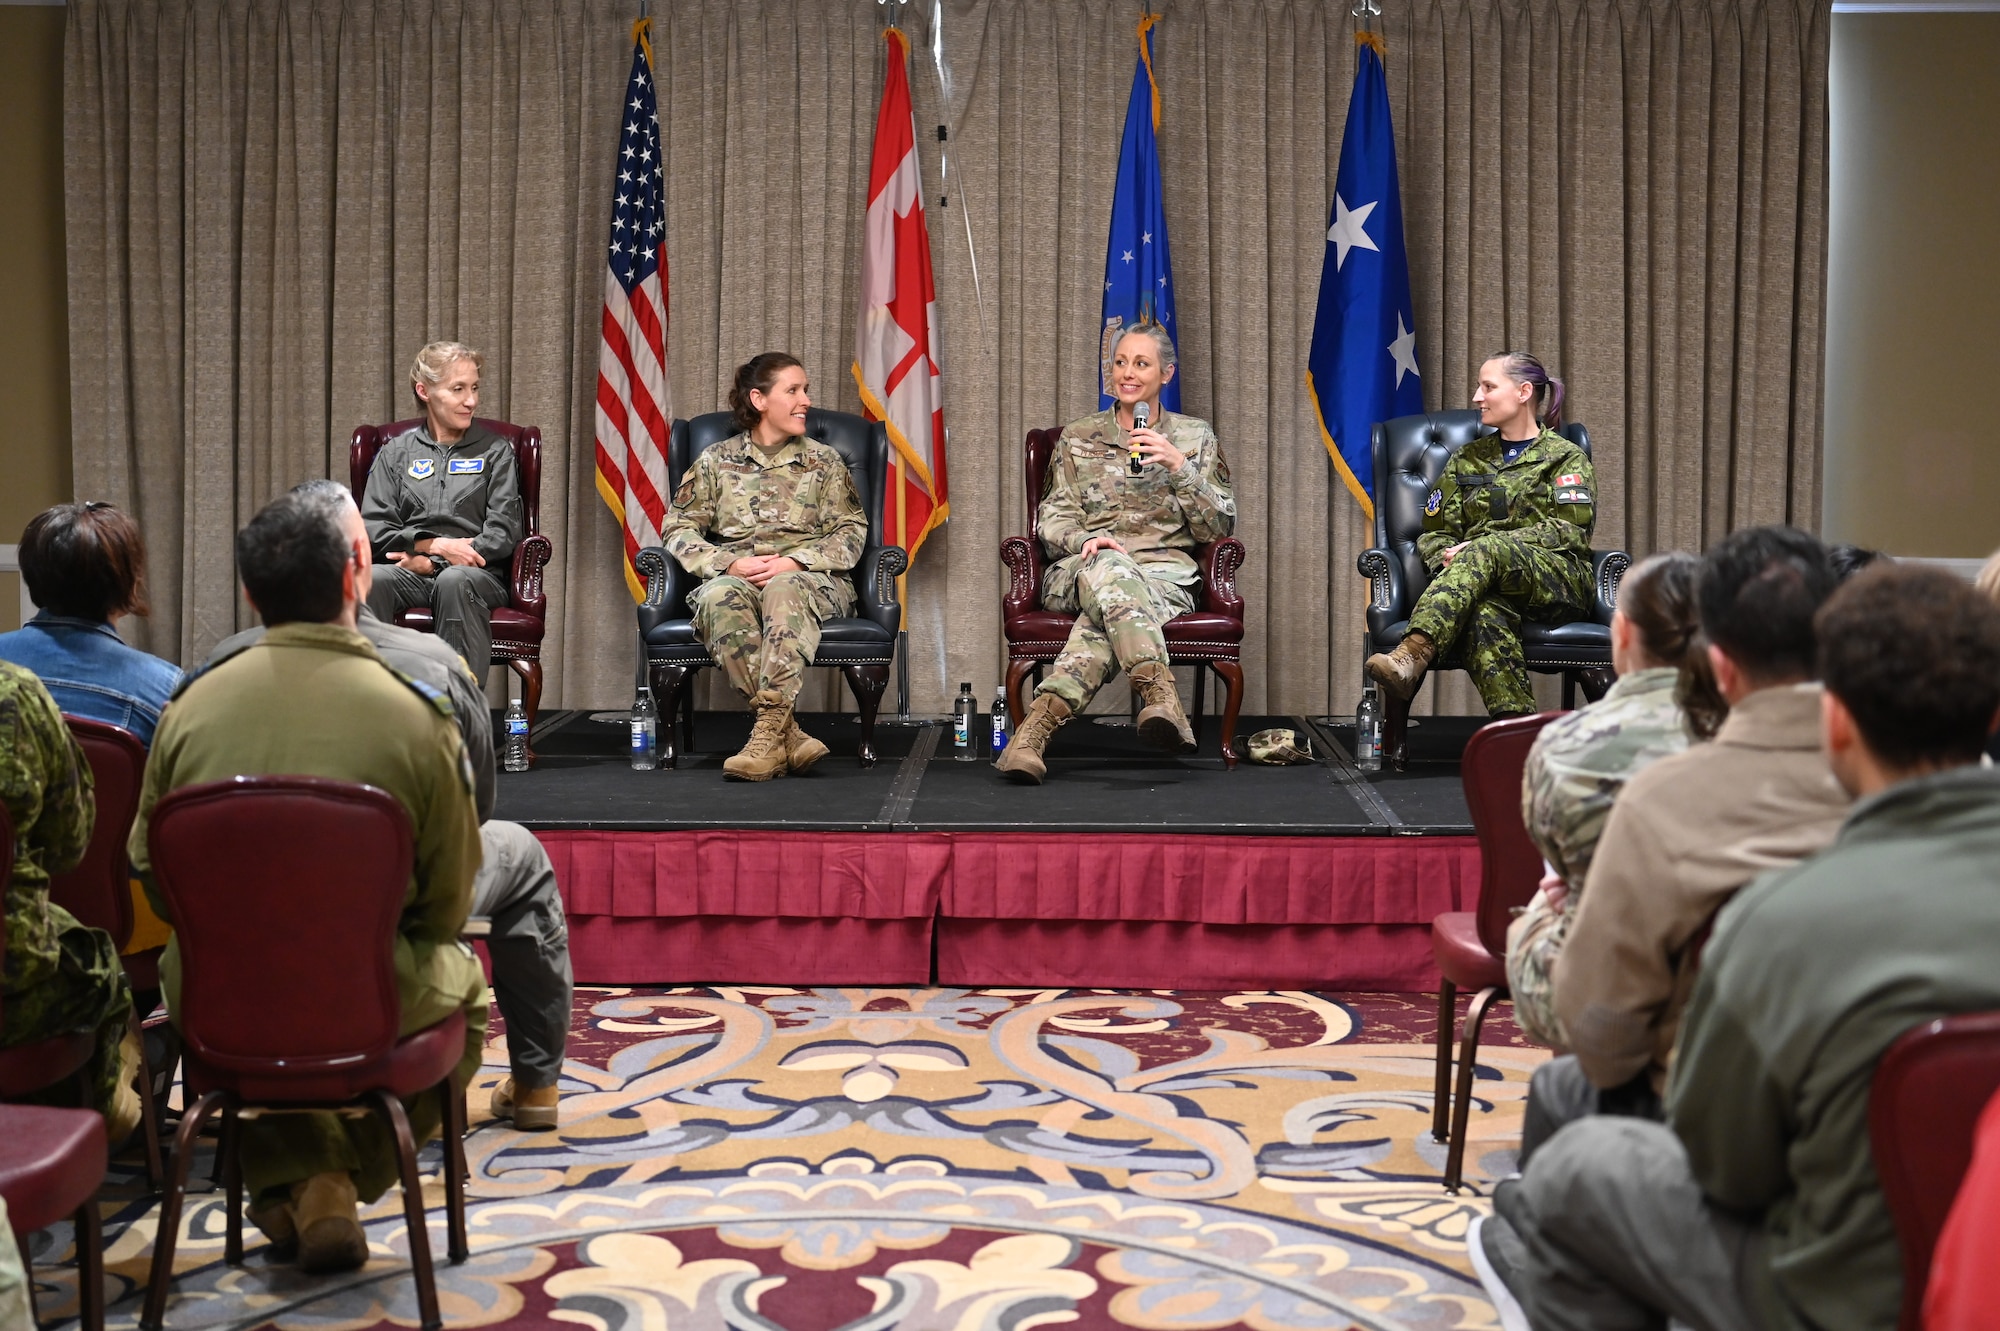 Four female Airmen sitting at panel in front of crowd